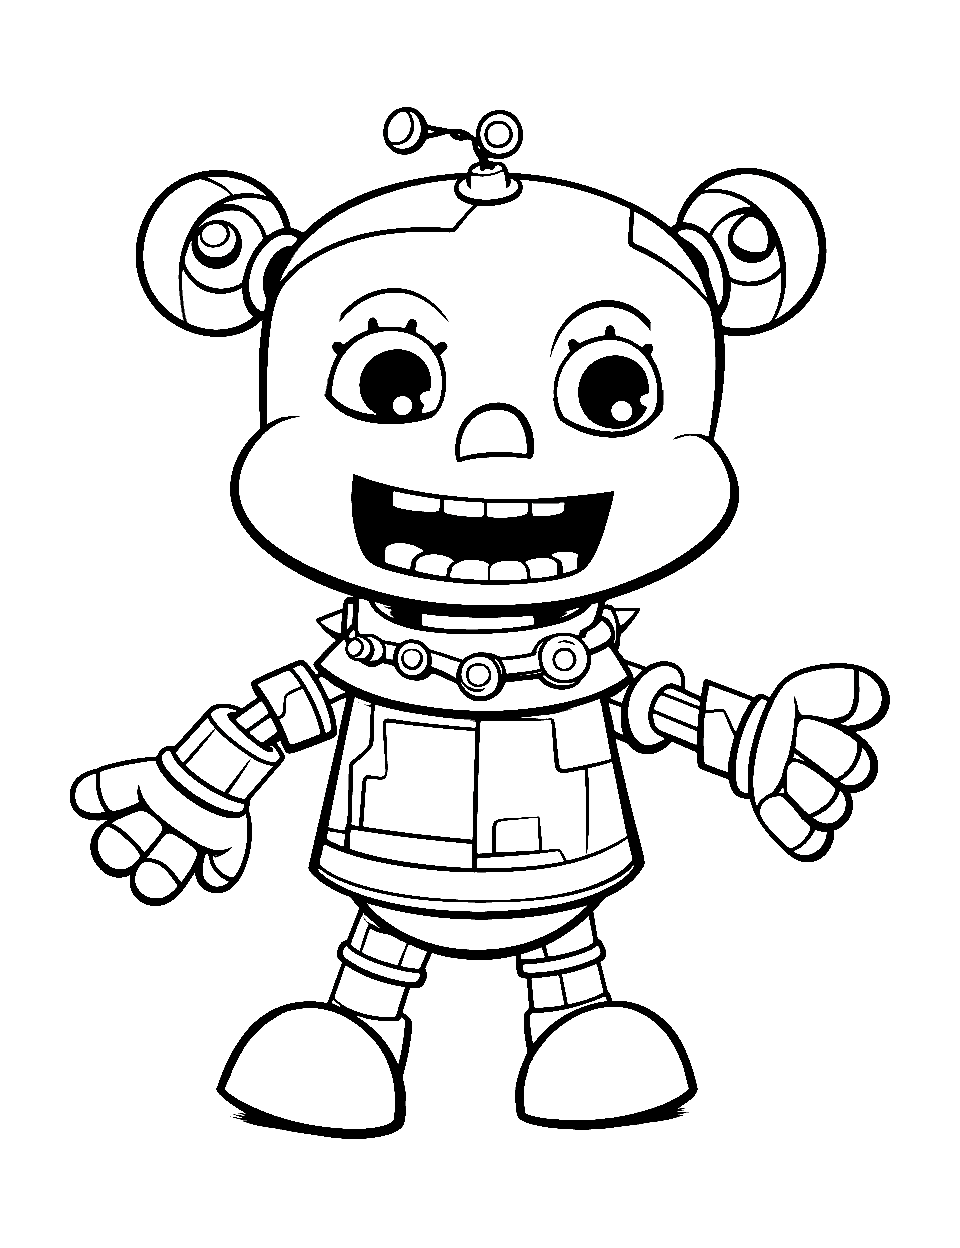 Toy Animatronic Play Five Nights at Freddys Coloring Page - A toy animatronic enjoying playtime.